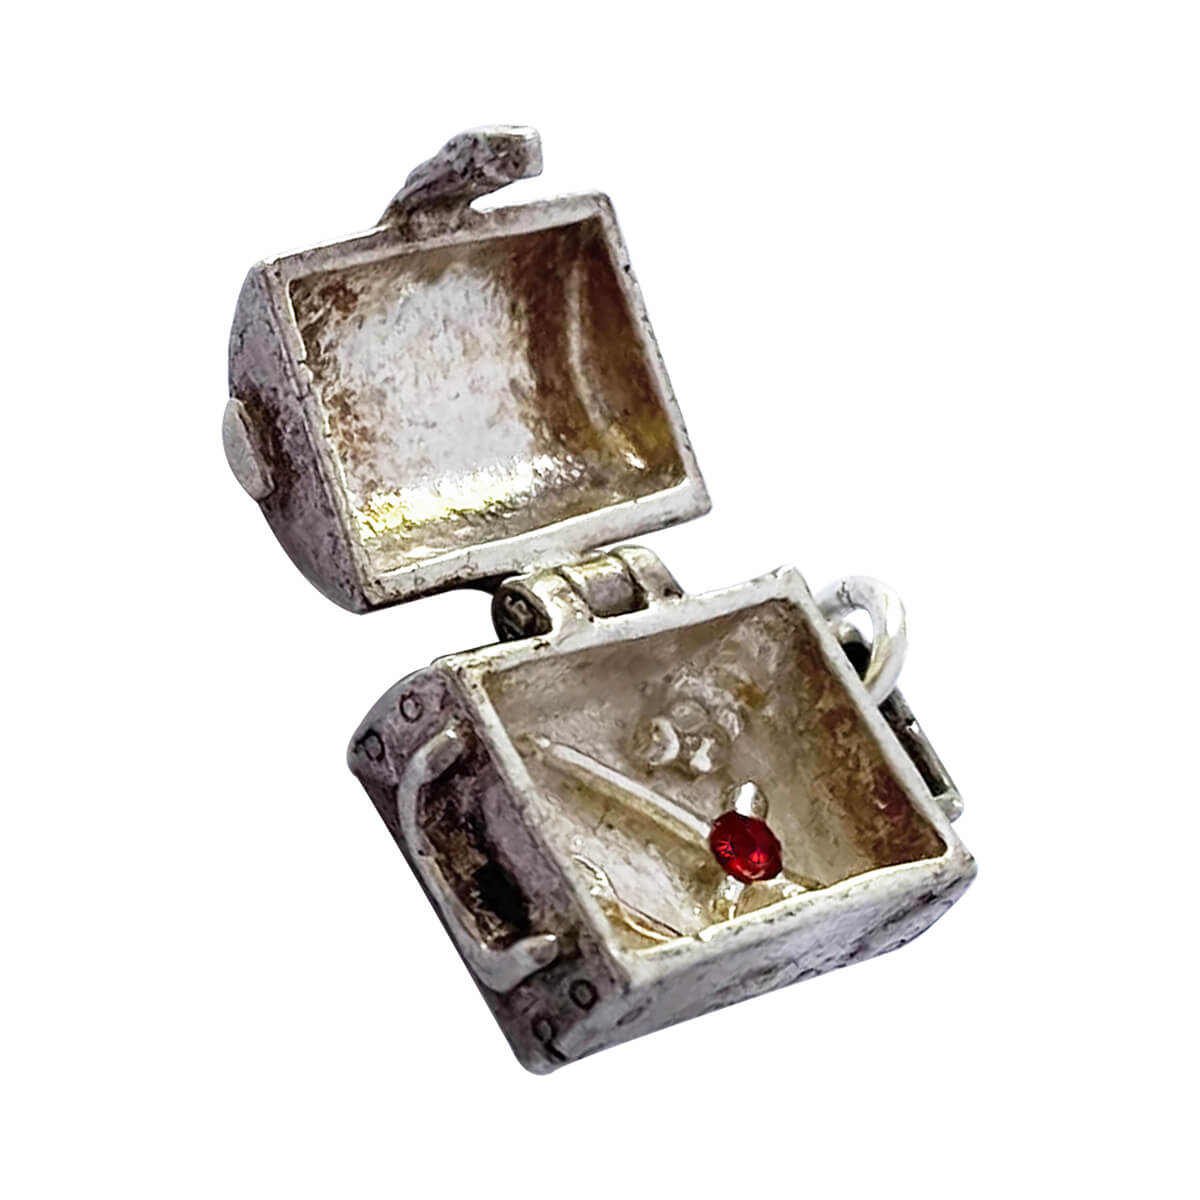 Vintage Nuvo treasure chest charm opening to red crystal sterling silver pendant.